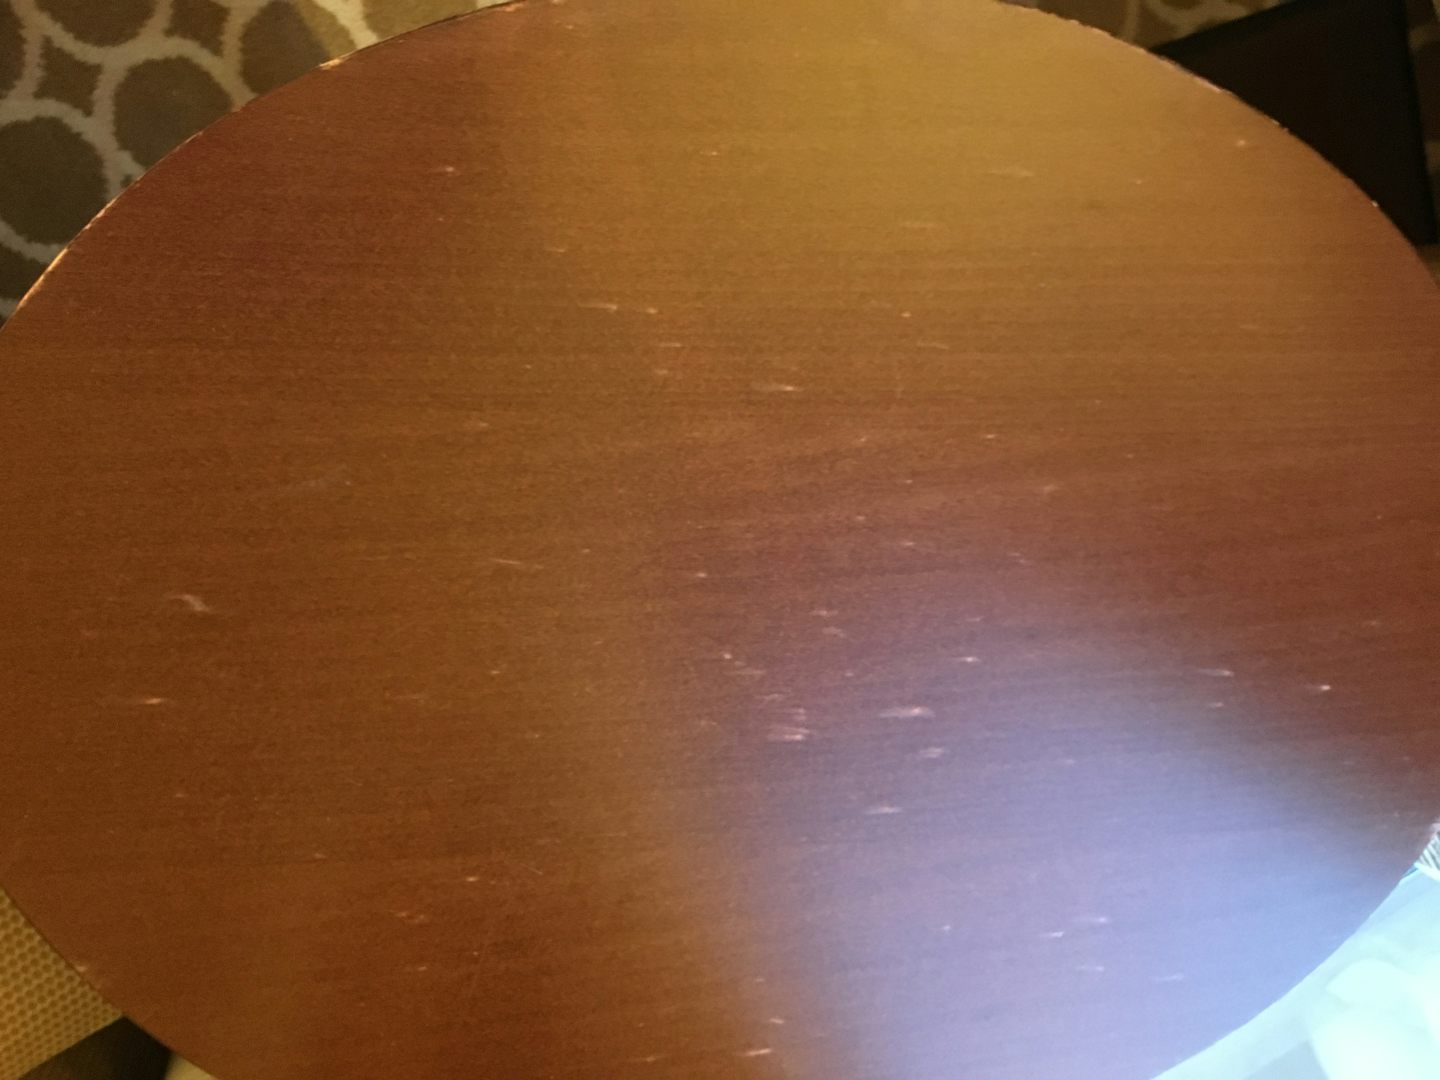 Table was scratched and worn. 